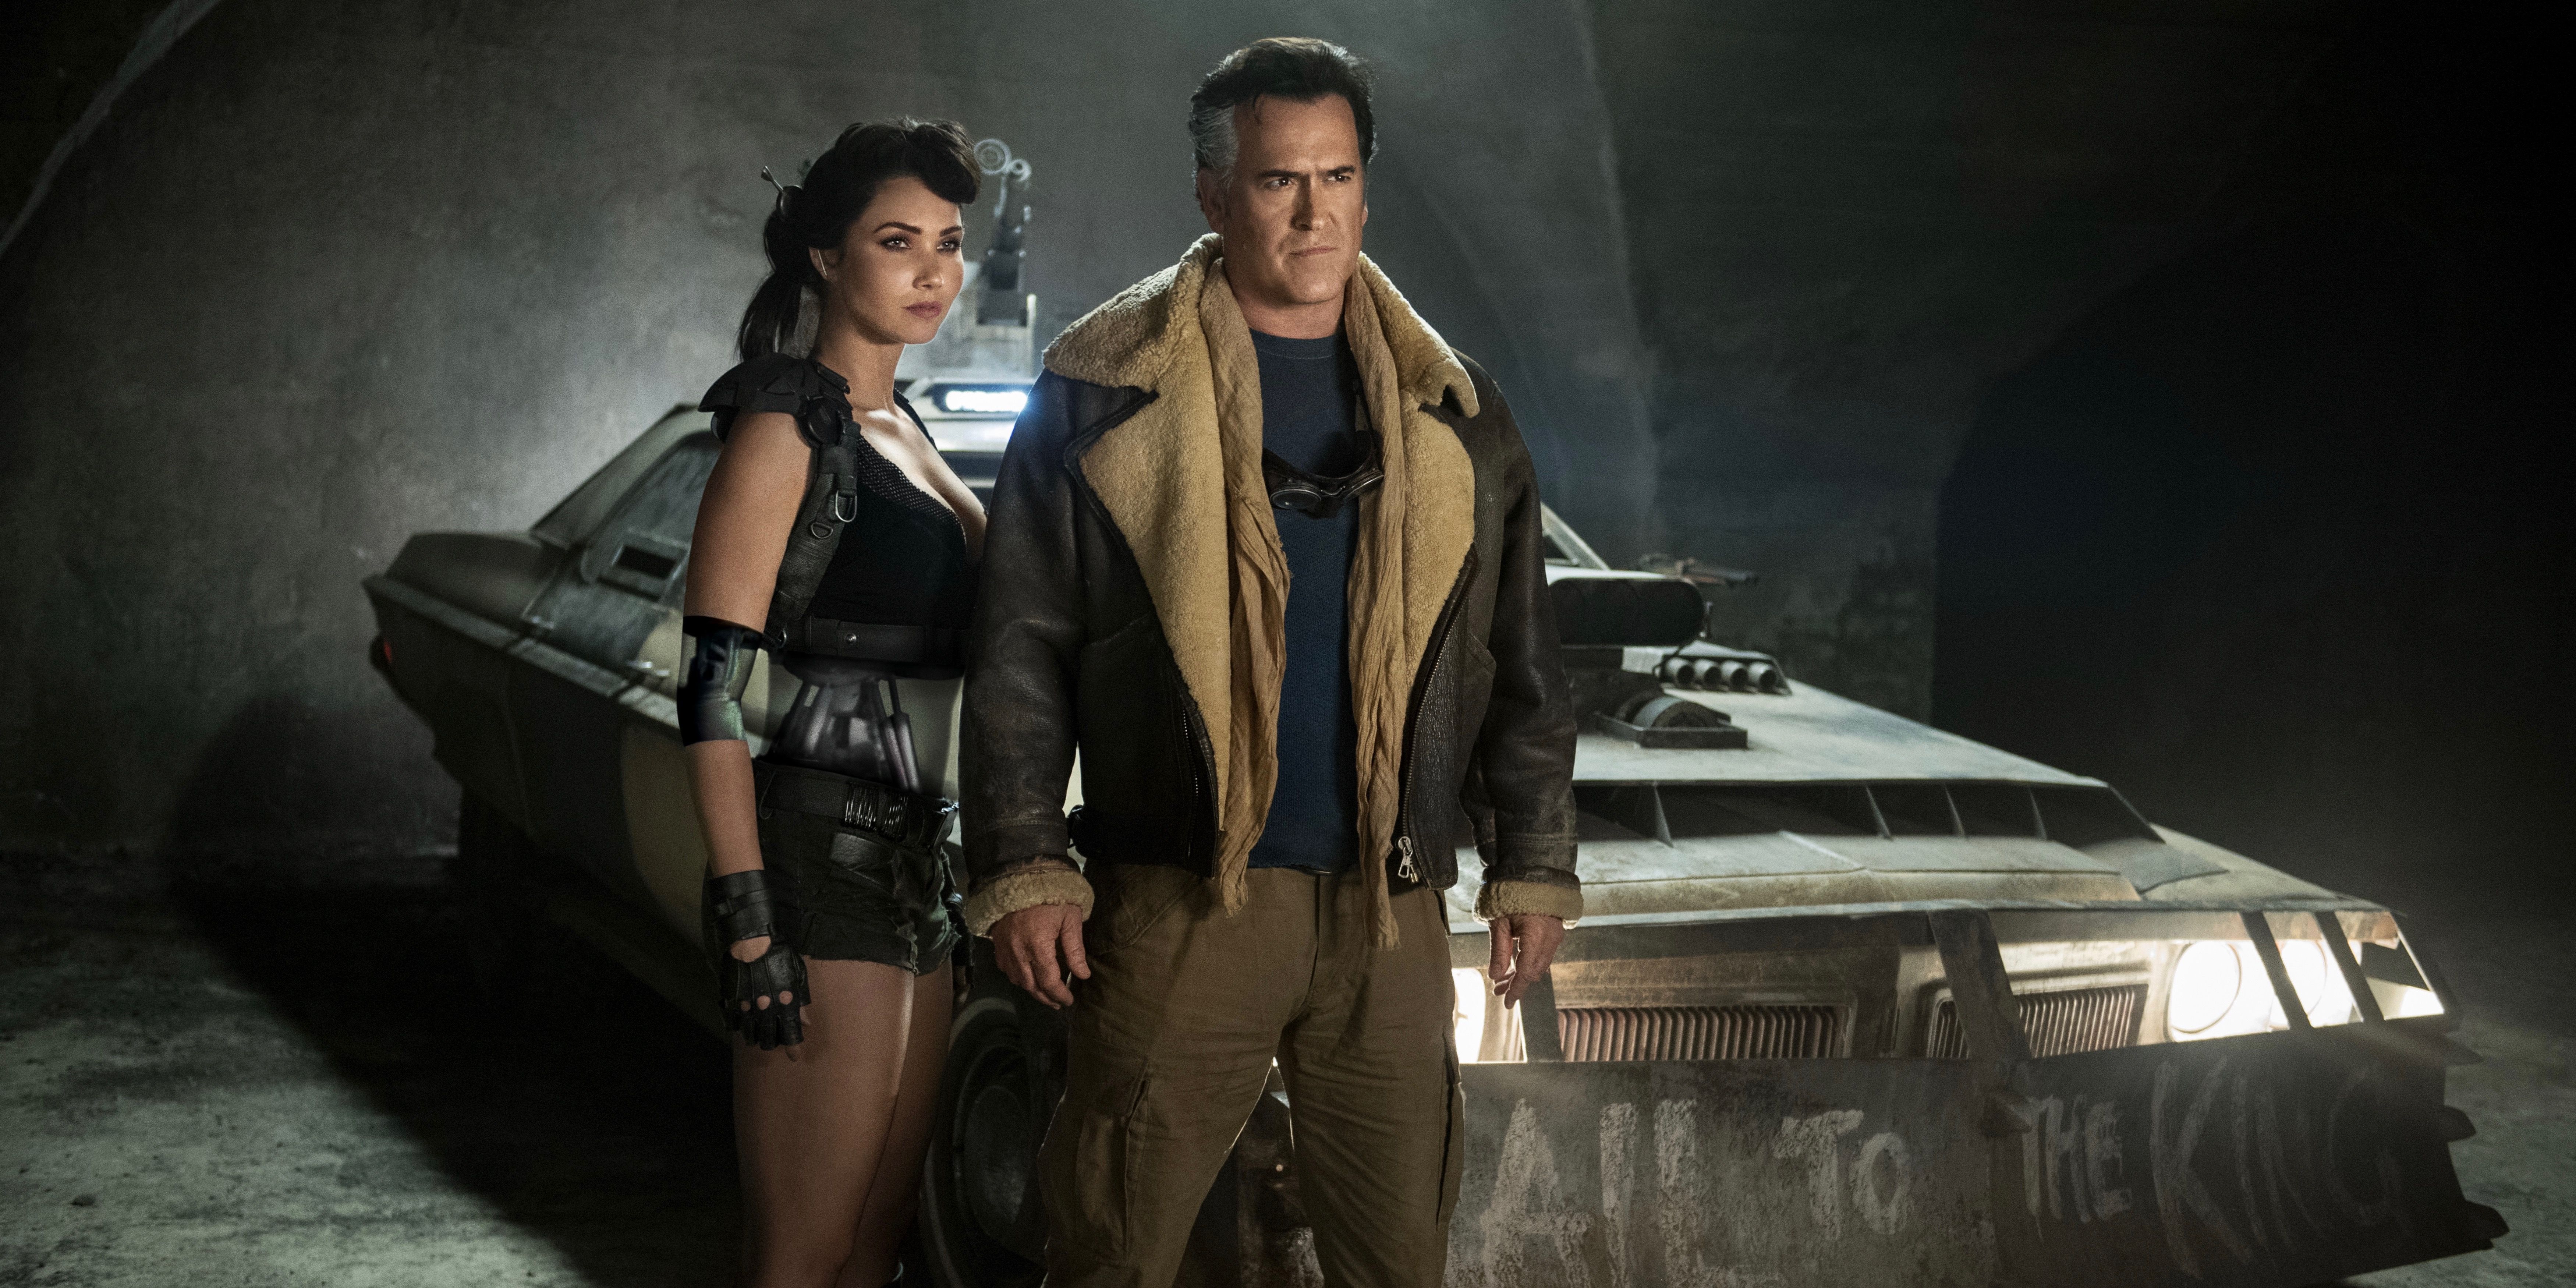 Bruce Campbell as Ash Williams with Jessica Green in Ash Vs Evil Dead